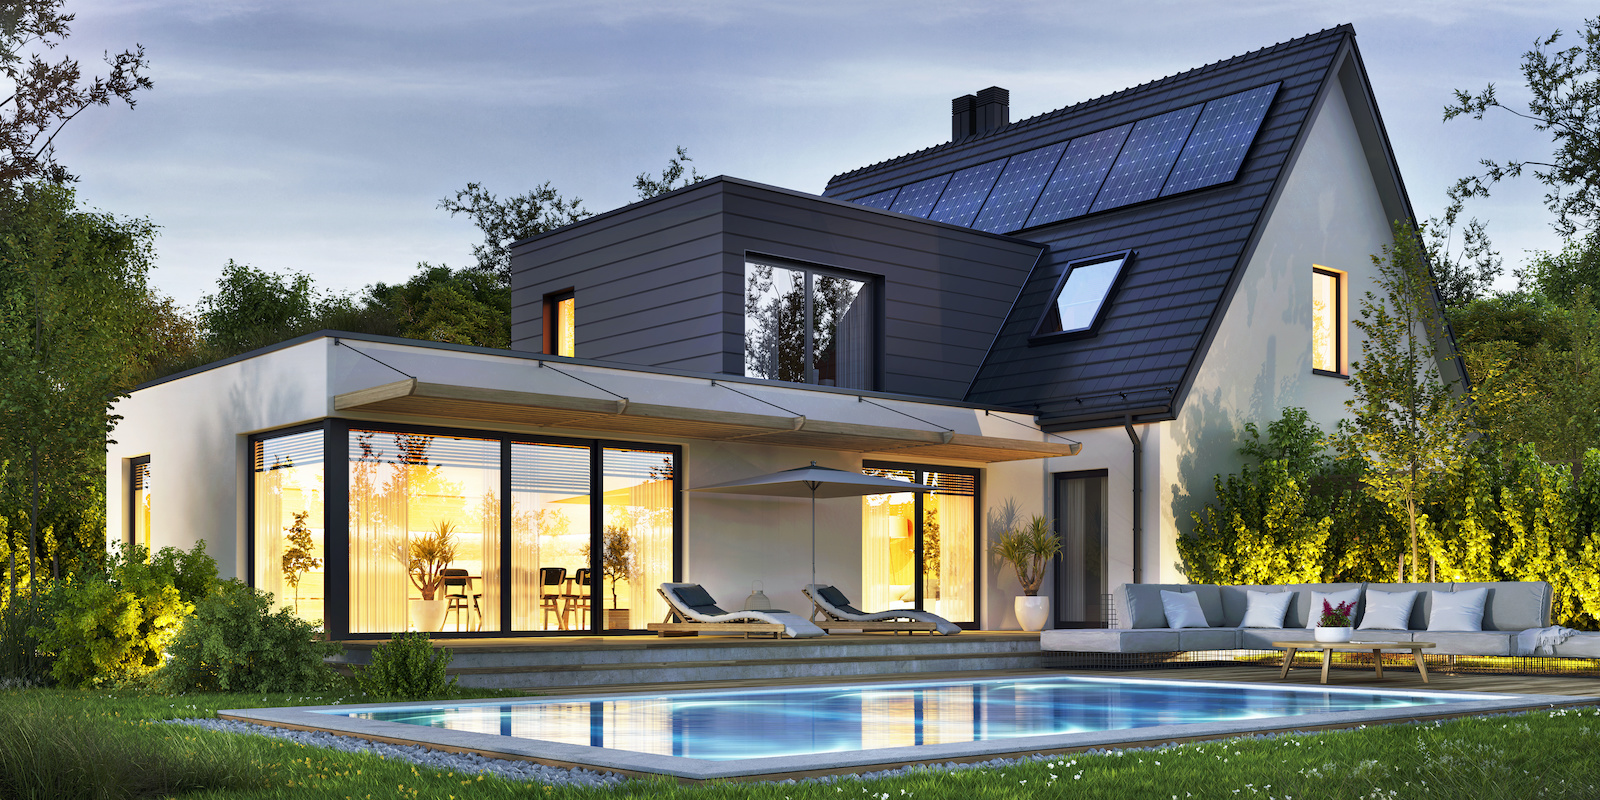 House with solar panels